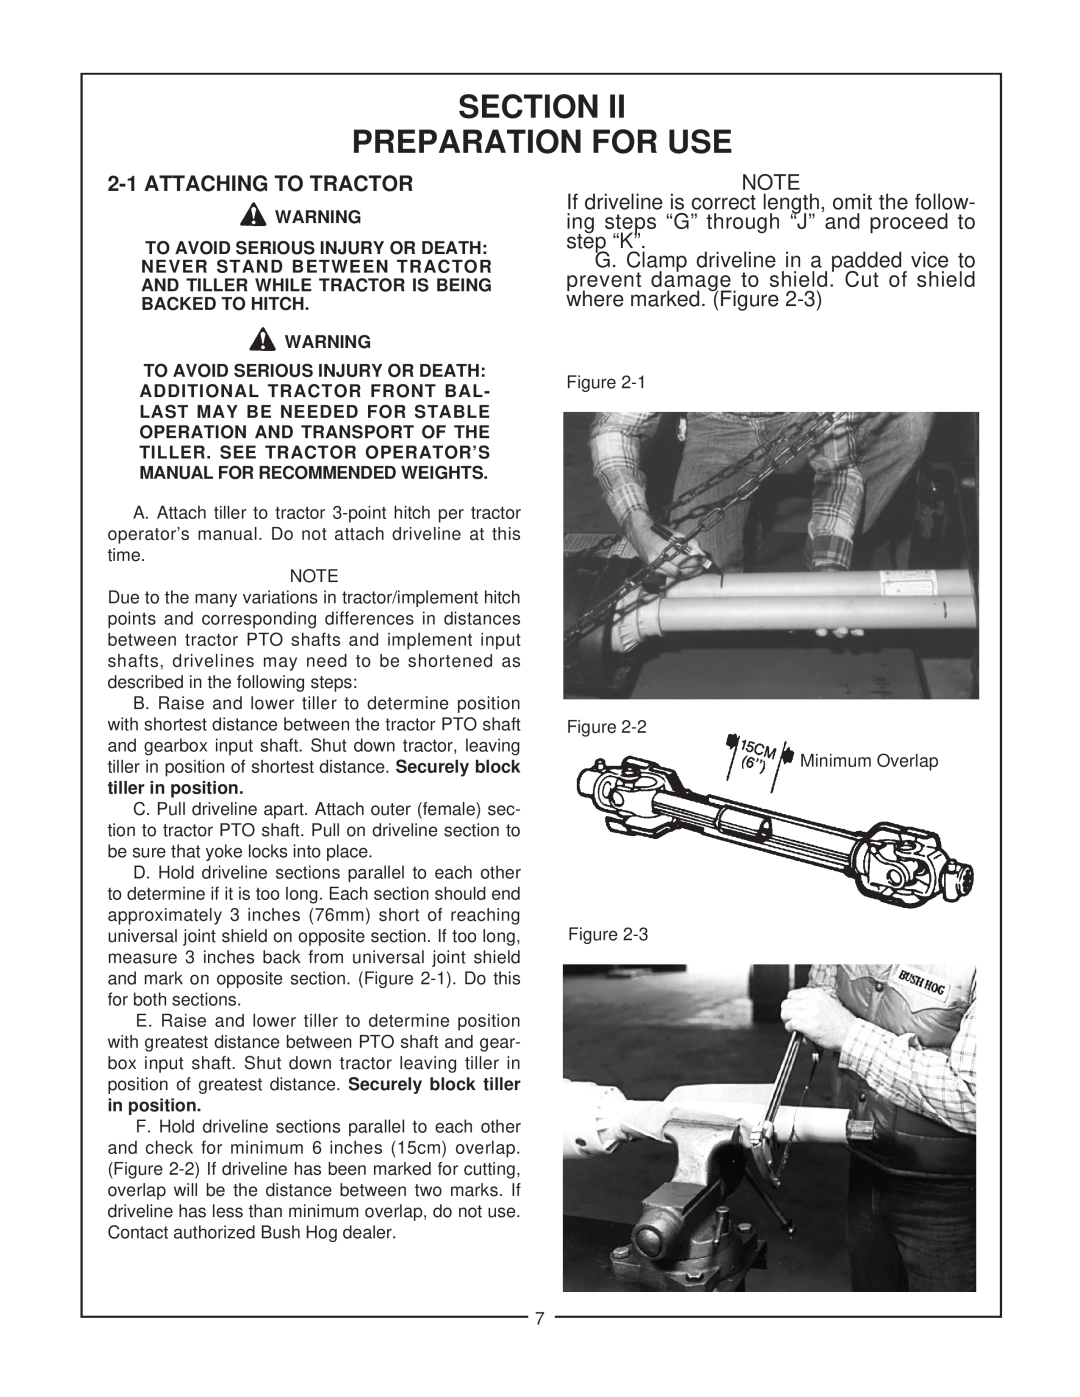 Bush Hog RTS manual Section Preparation For Use, 2-1ATTACHING TO TRACTOR 